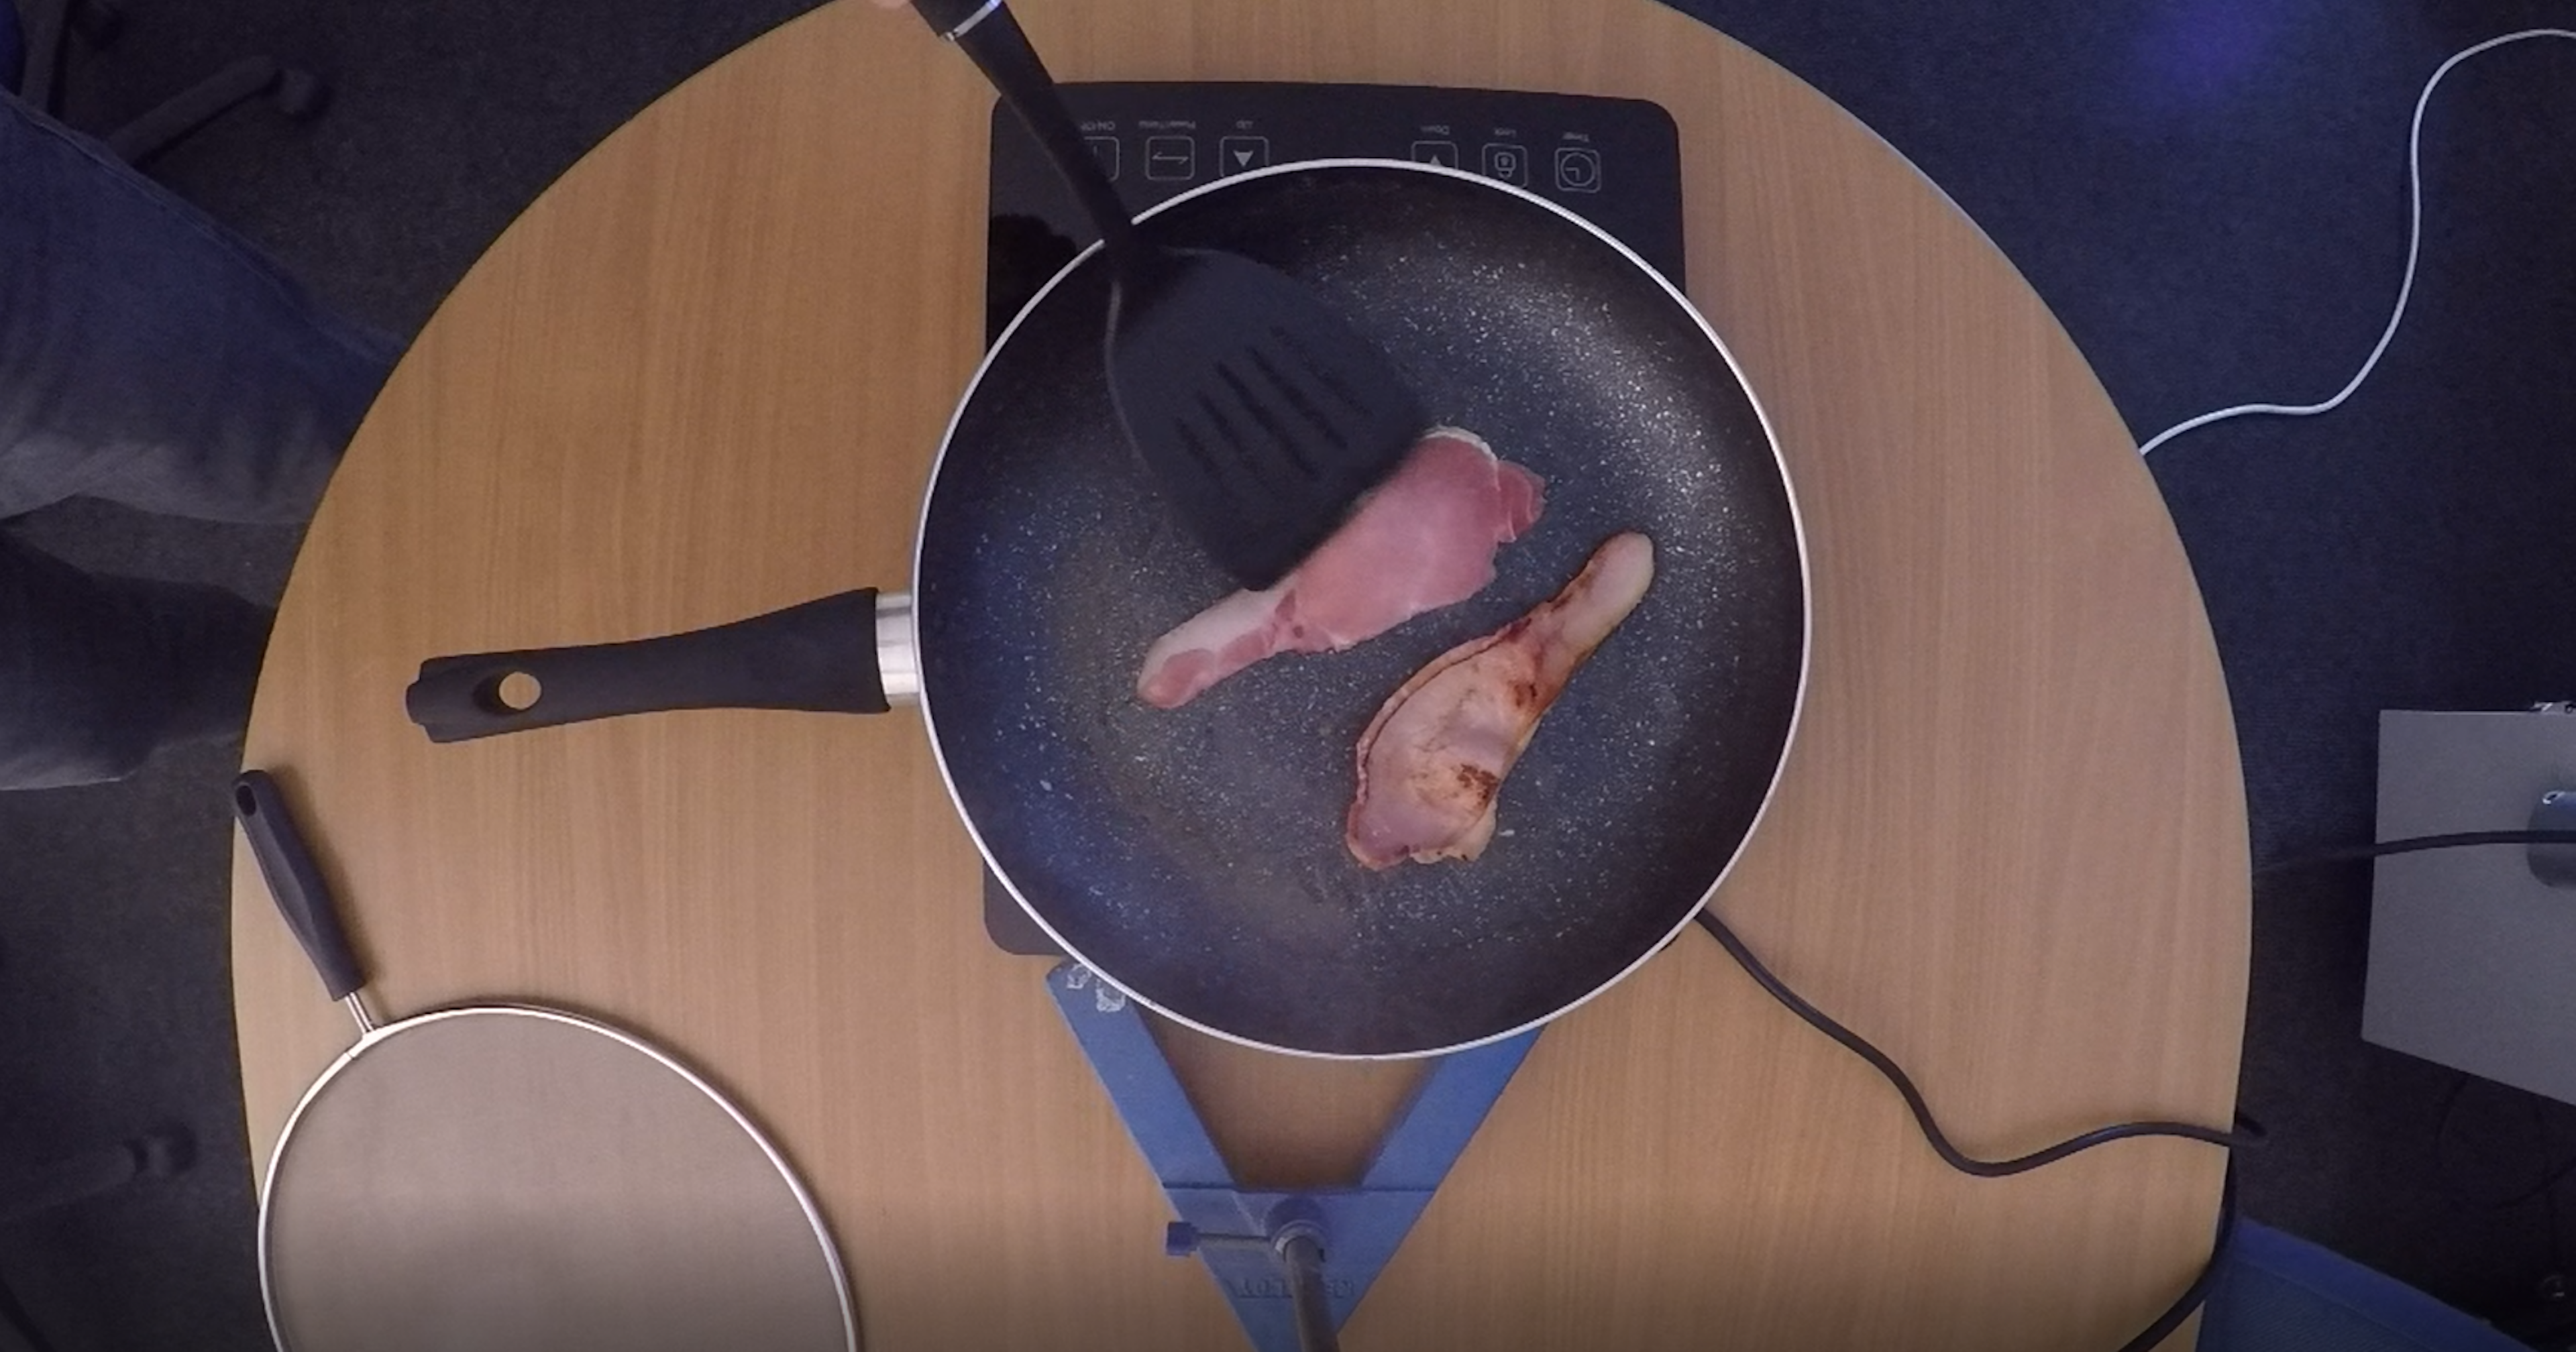 Bacon being turned in a pan to monitor emissions during cooking